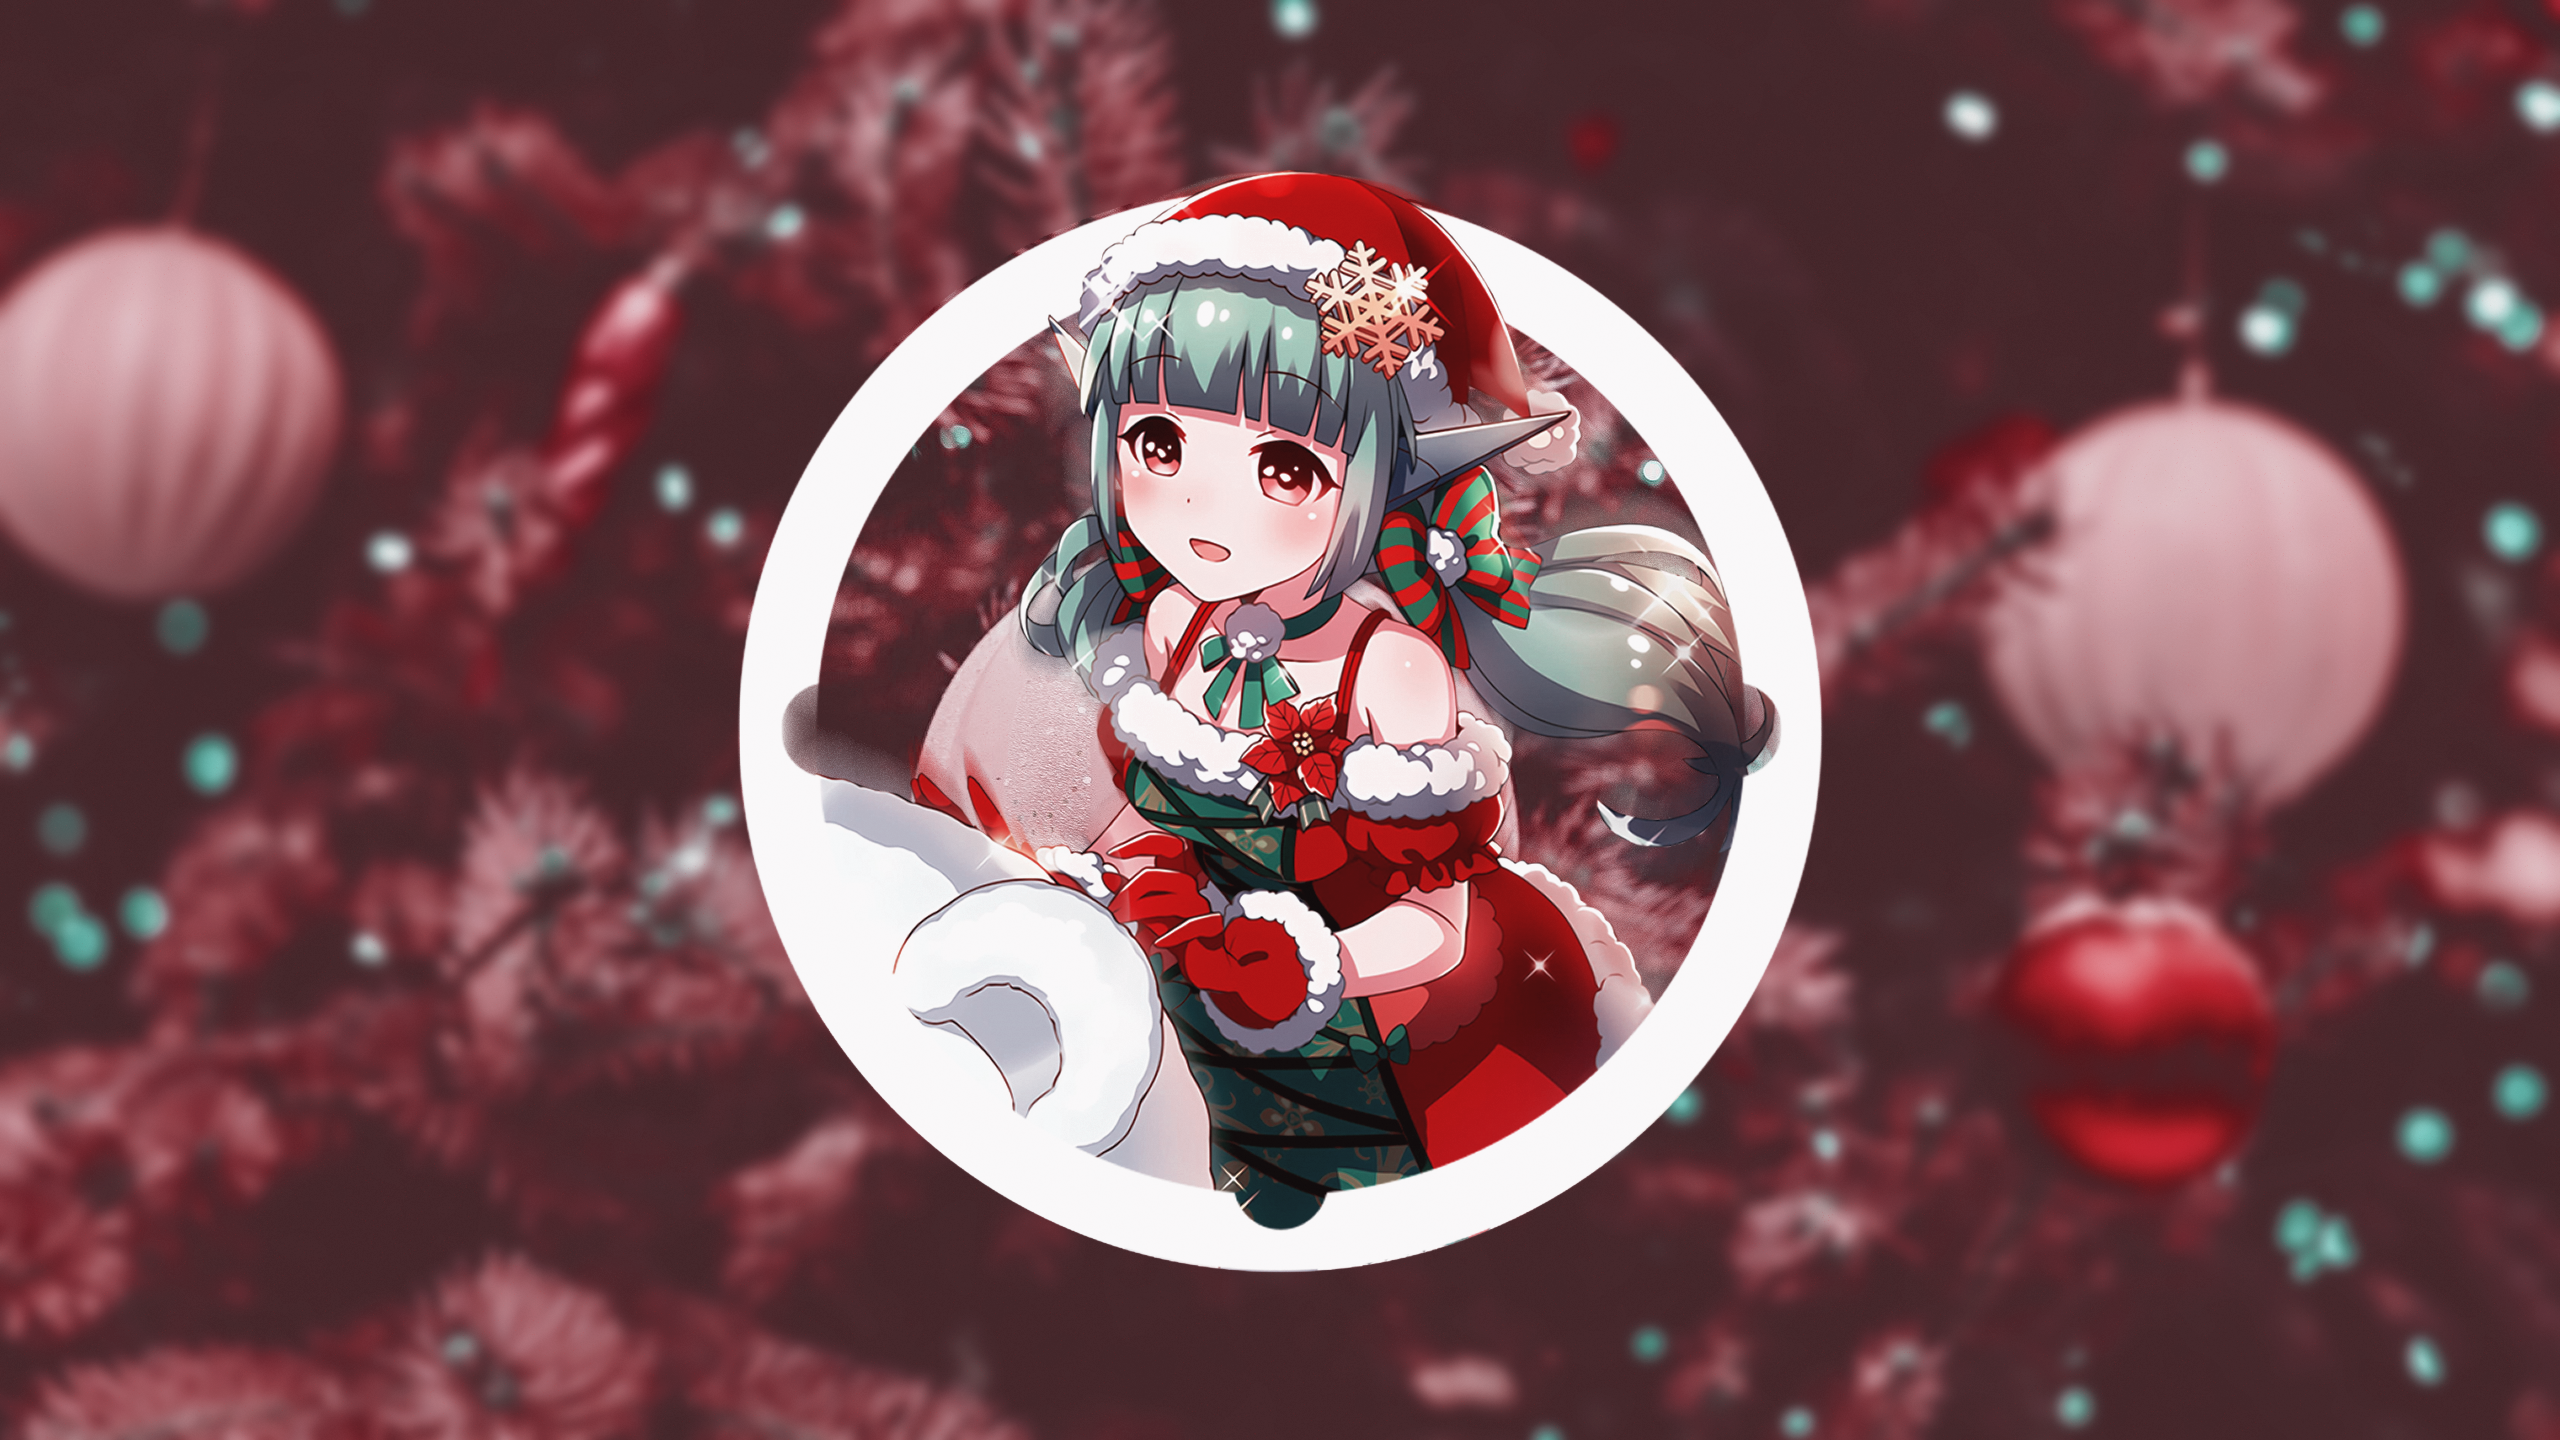 Piture In Picture Christmas Anime Girls 2560x1440